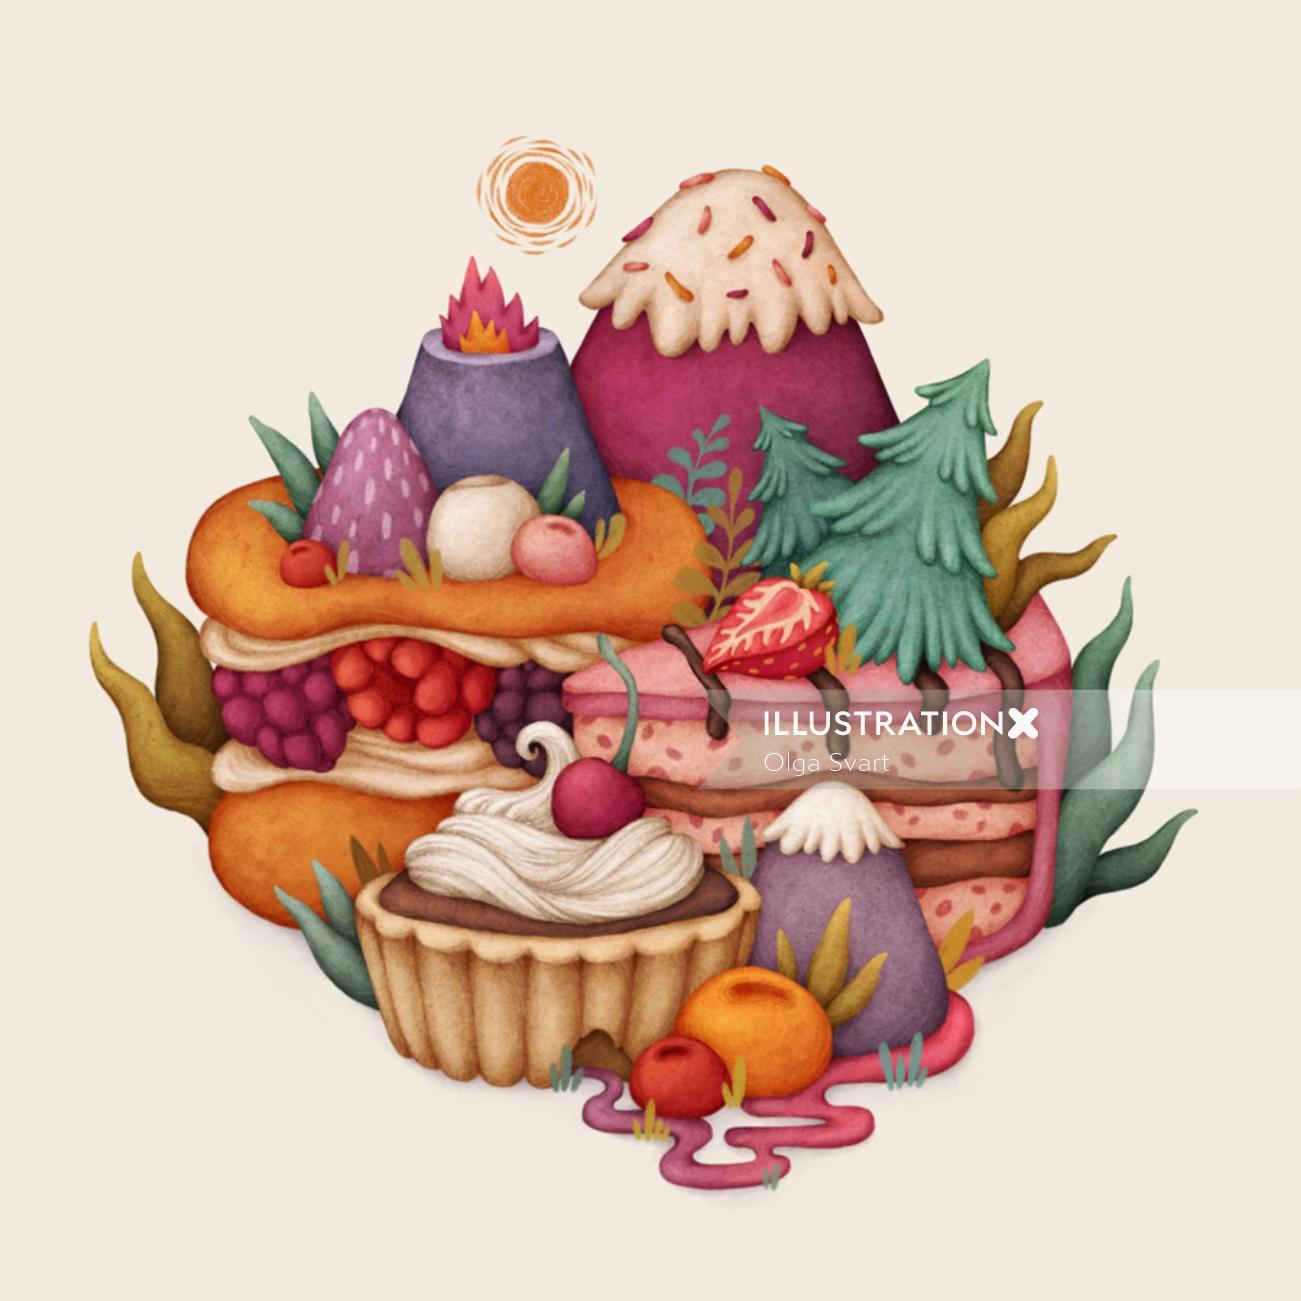 Art of cakes and pastries